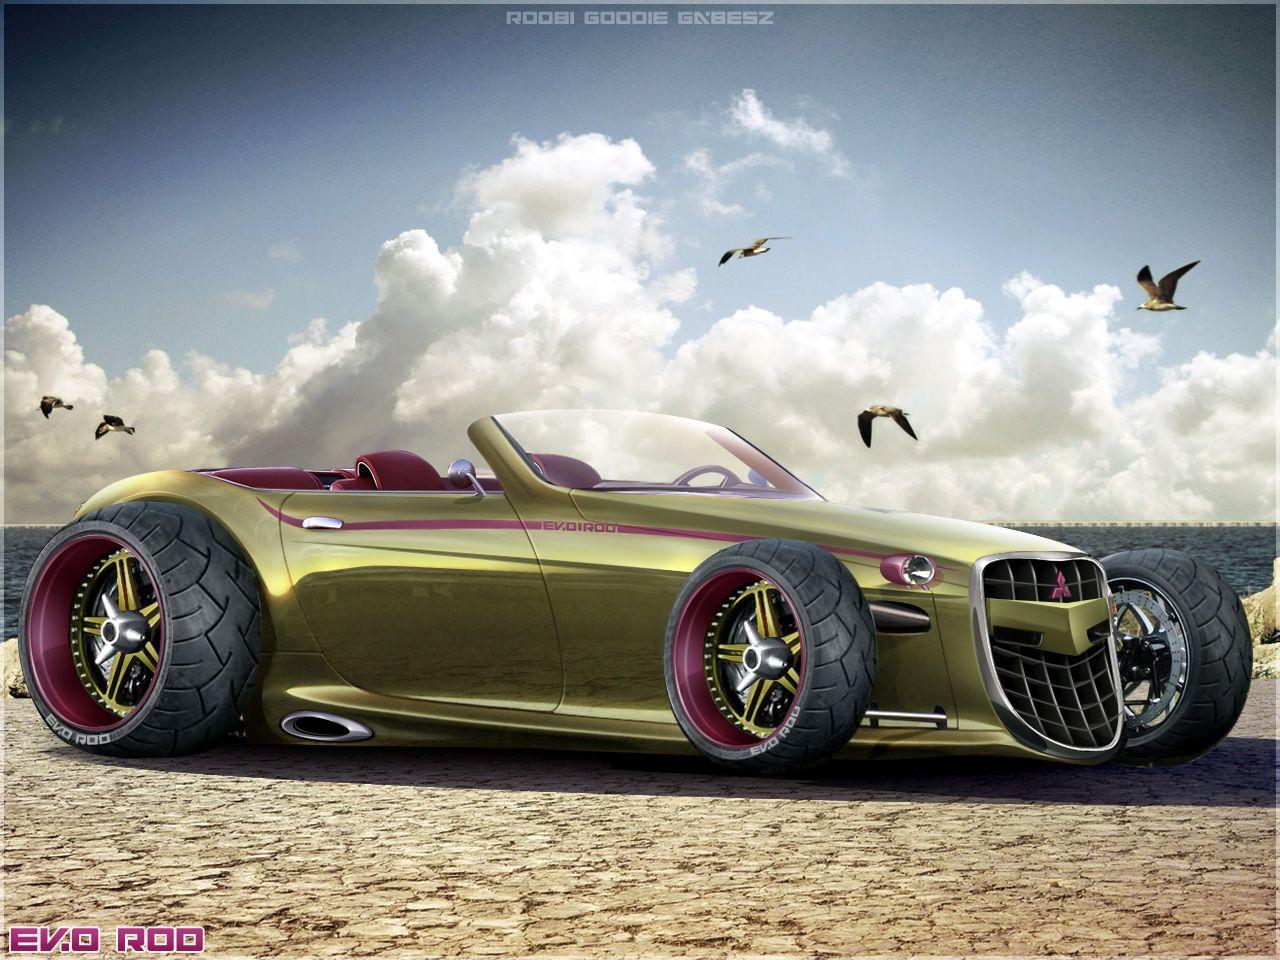 Wallpaper Desktop Background Cars And Car Photography On In Beach